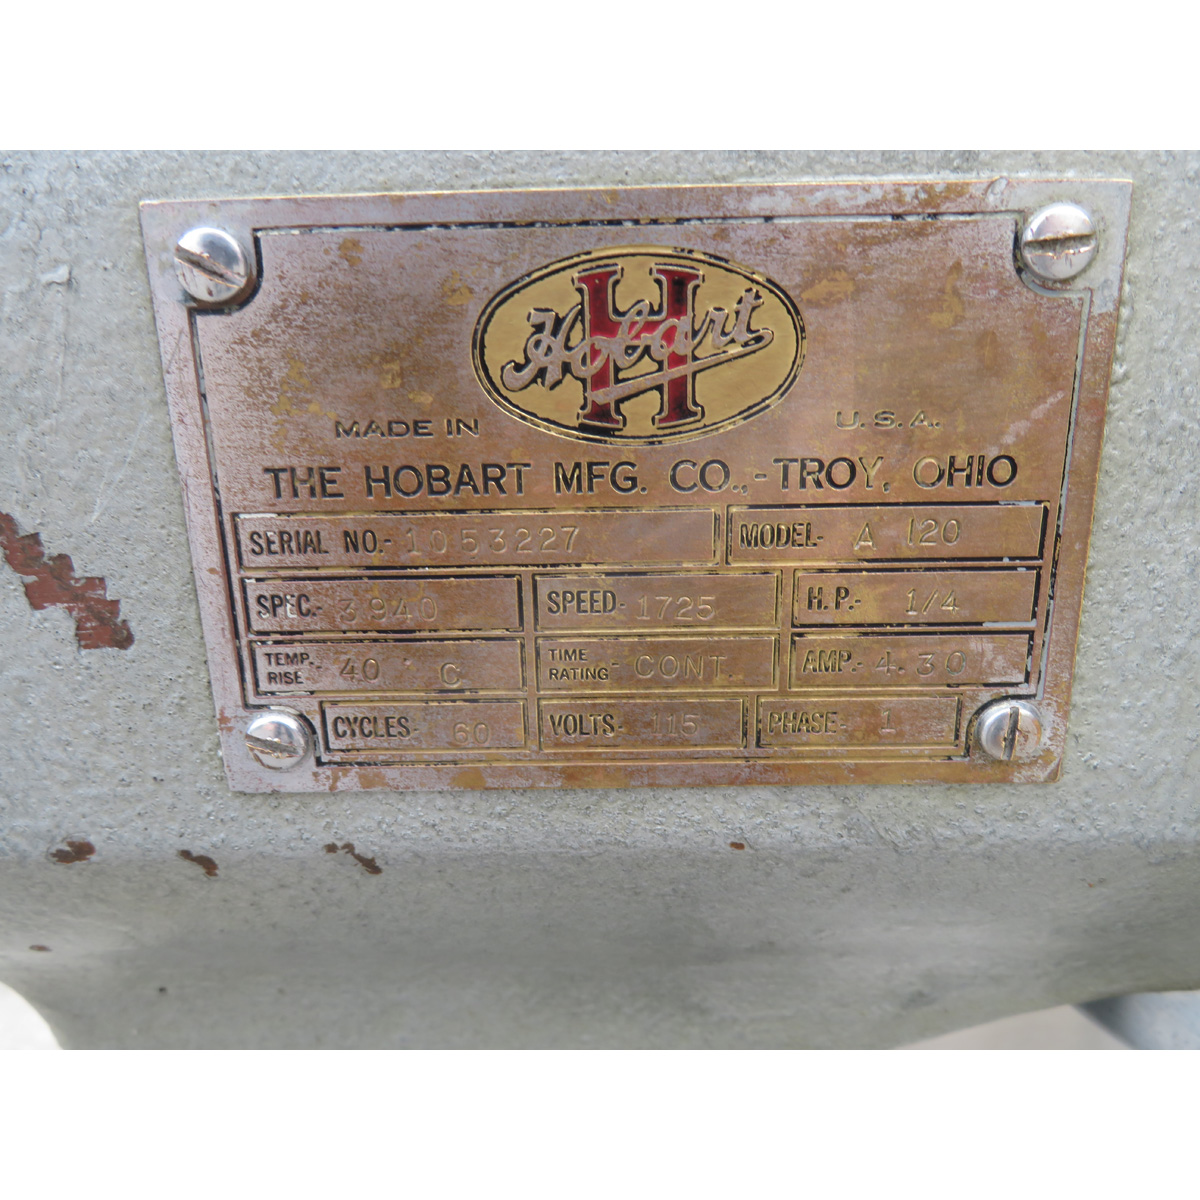 Hobart 12 Quart A120 Mixer, Used Very Good Condition image 2